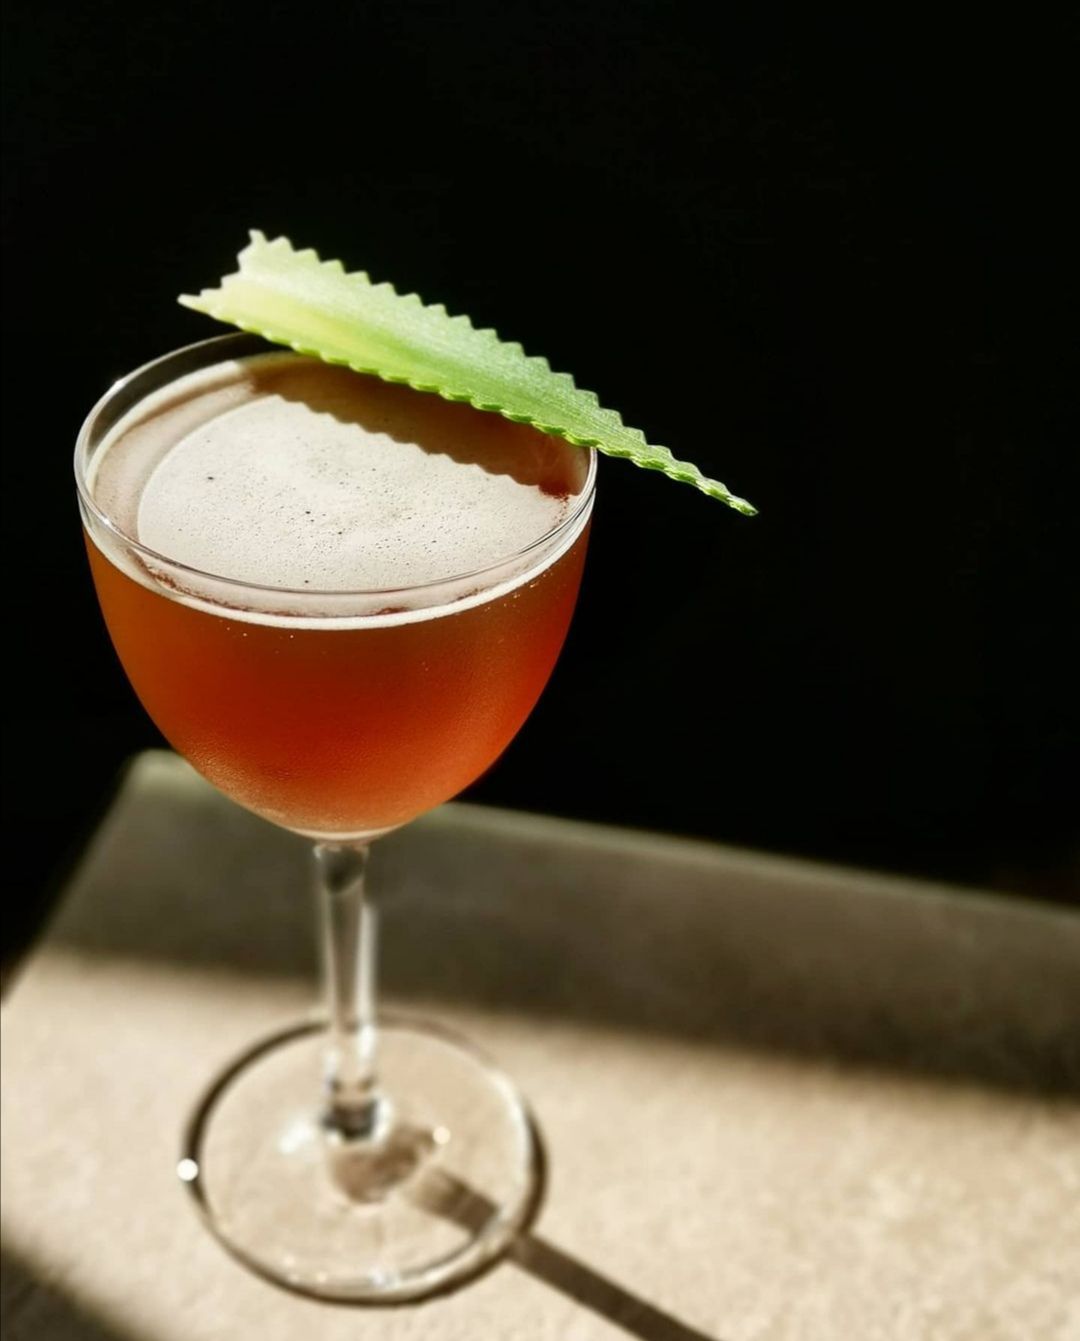 An orange-brown cocktail in a delicate glass is garnished with a green leaf with ridged edges. The drink sits on a stone bar.